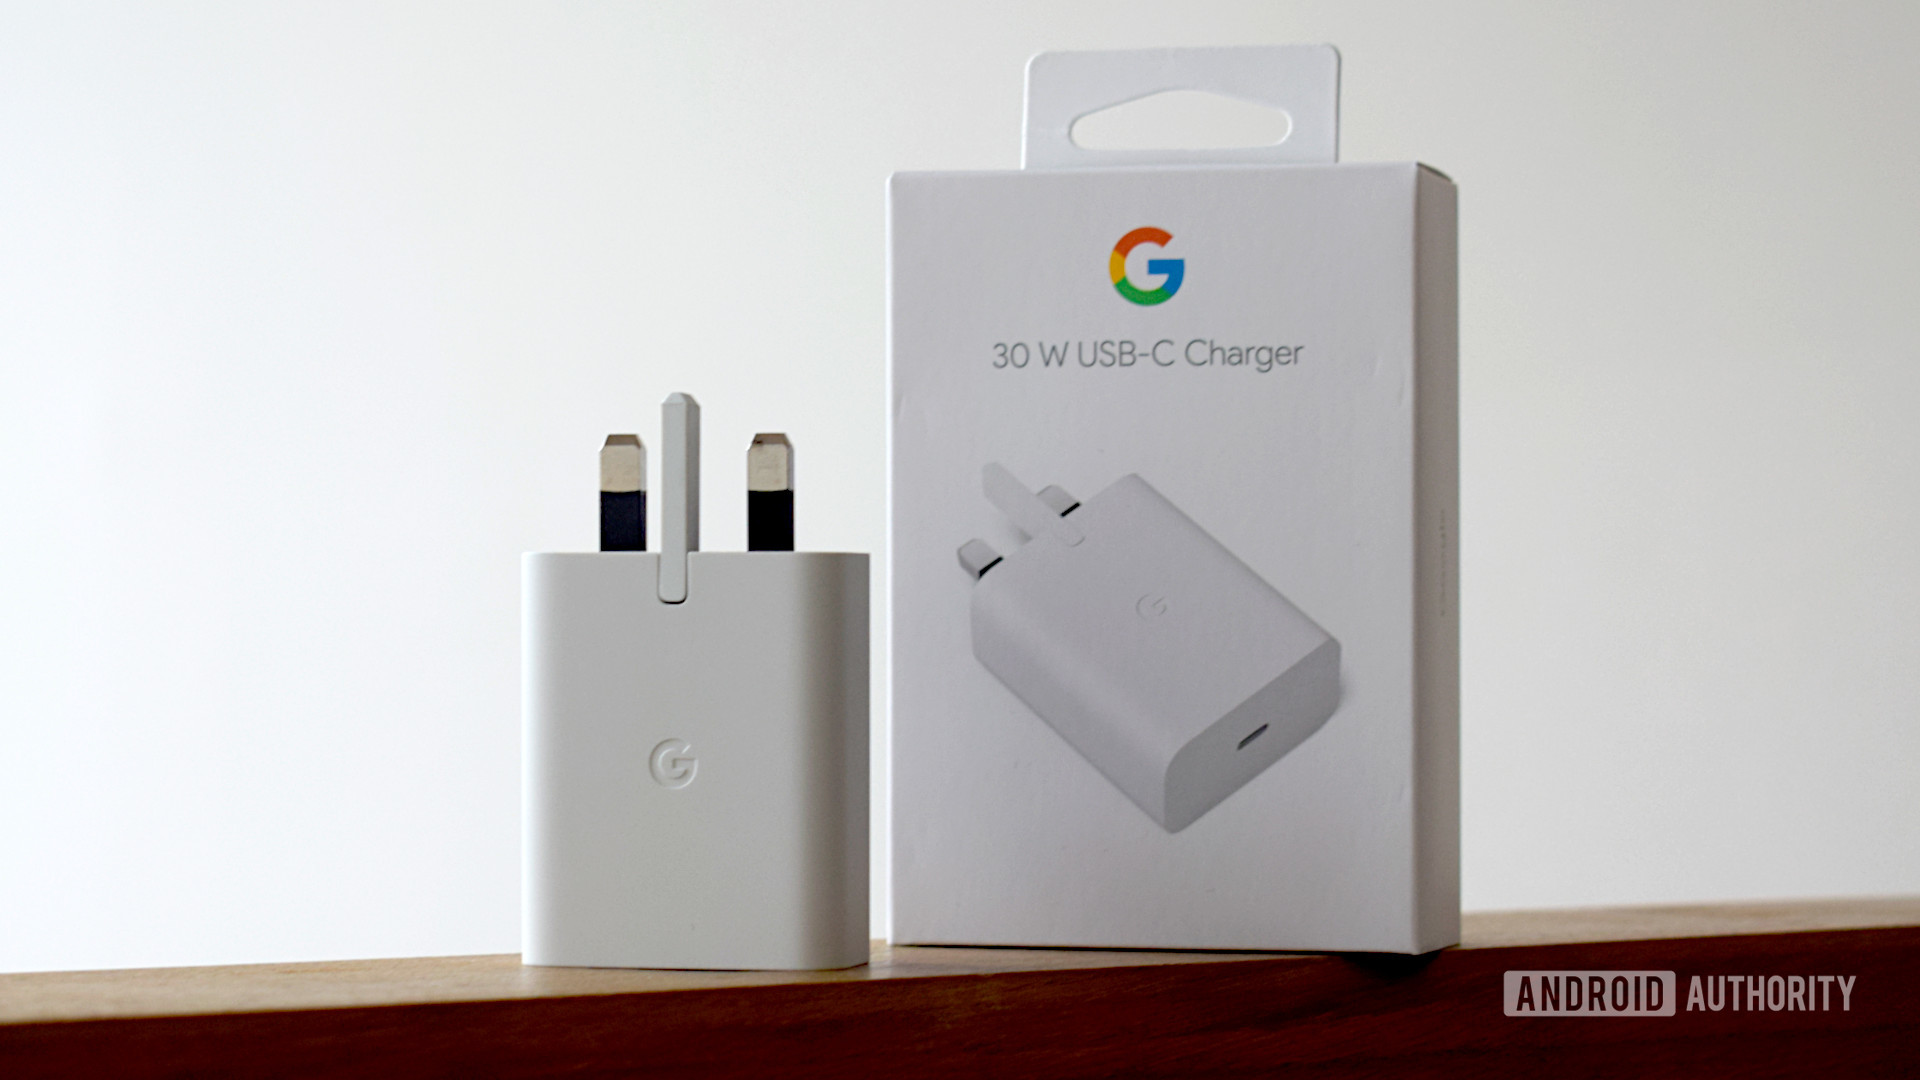 Google 30W USB C Power Charger Upright Next to the Box